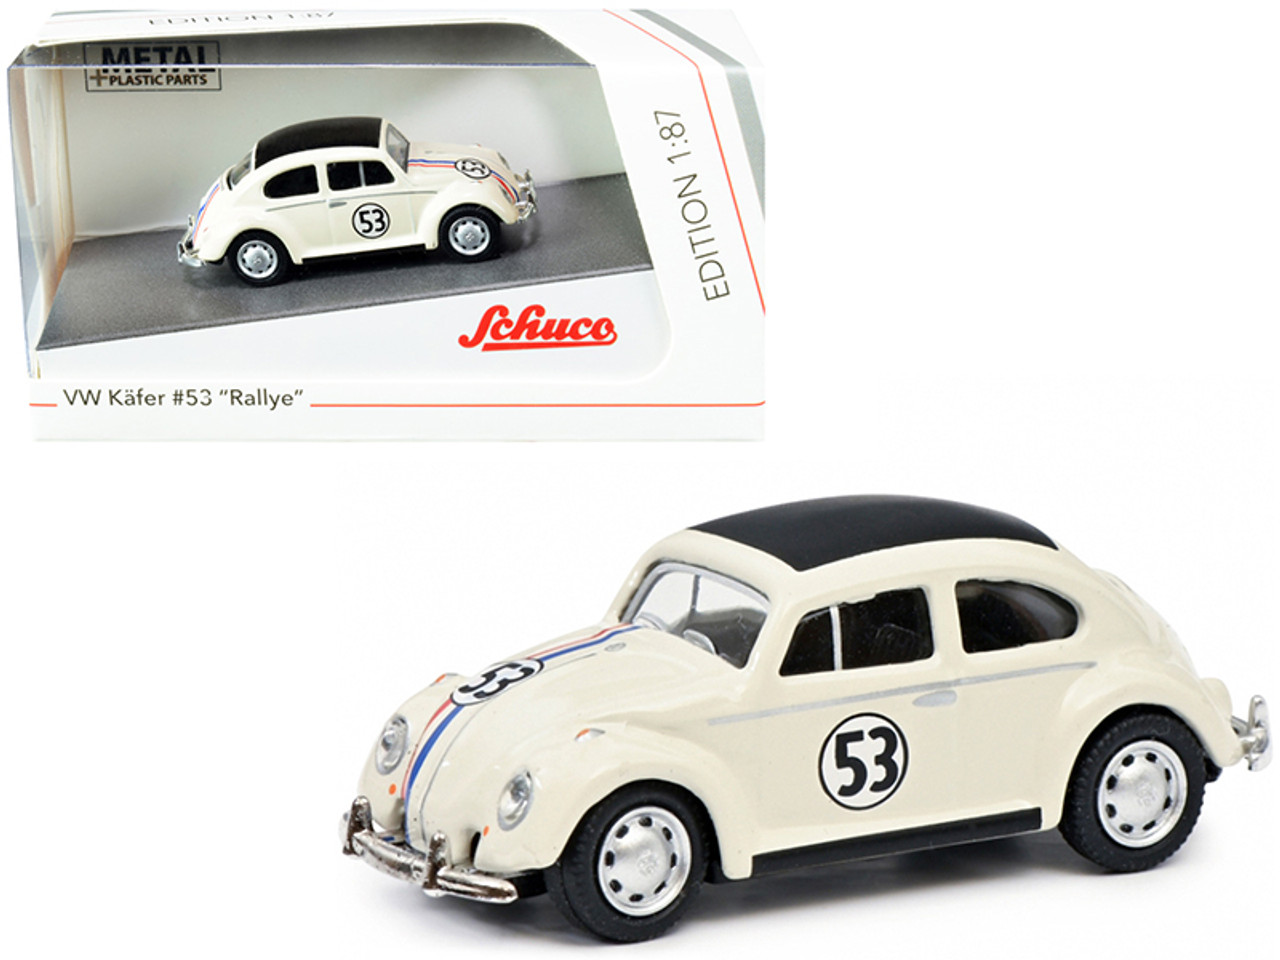 SCHUCO 21888 VW BEETLE die cast model rally car HERBIE livery no.53 1:87th scale 